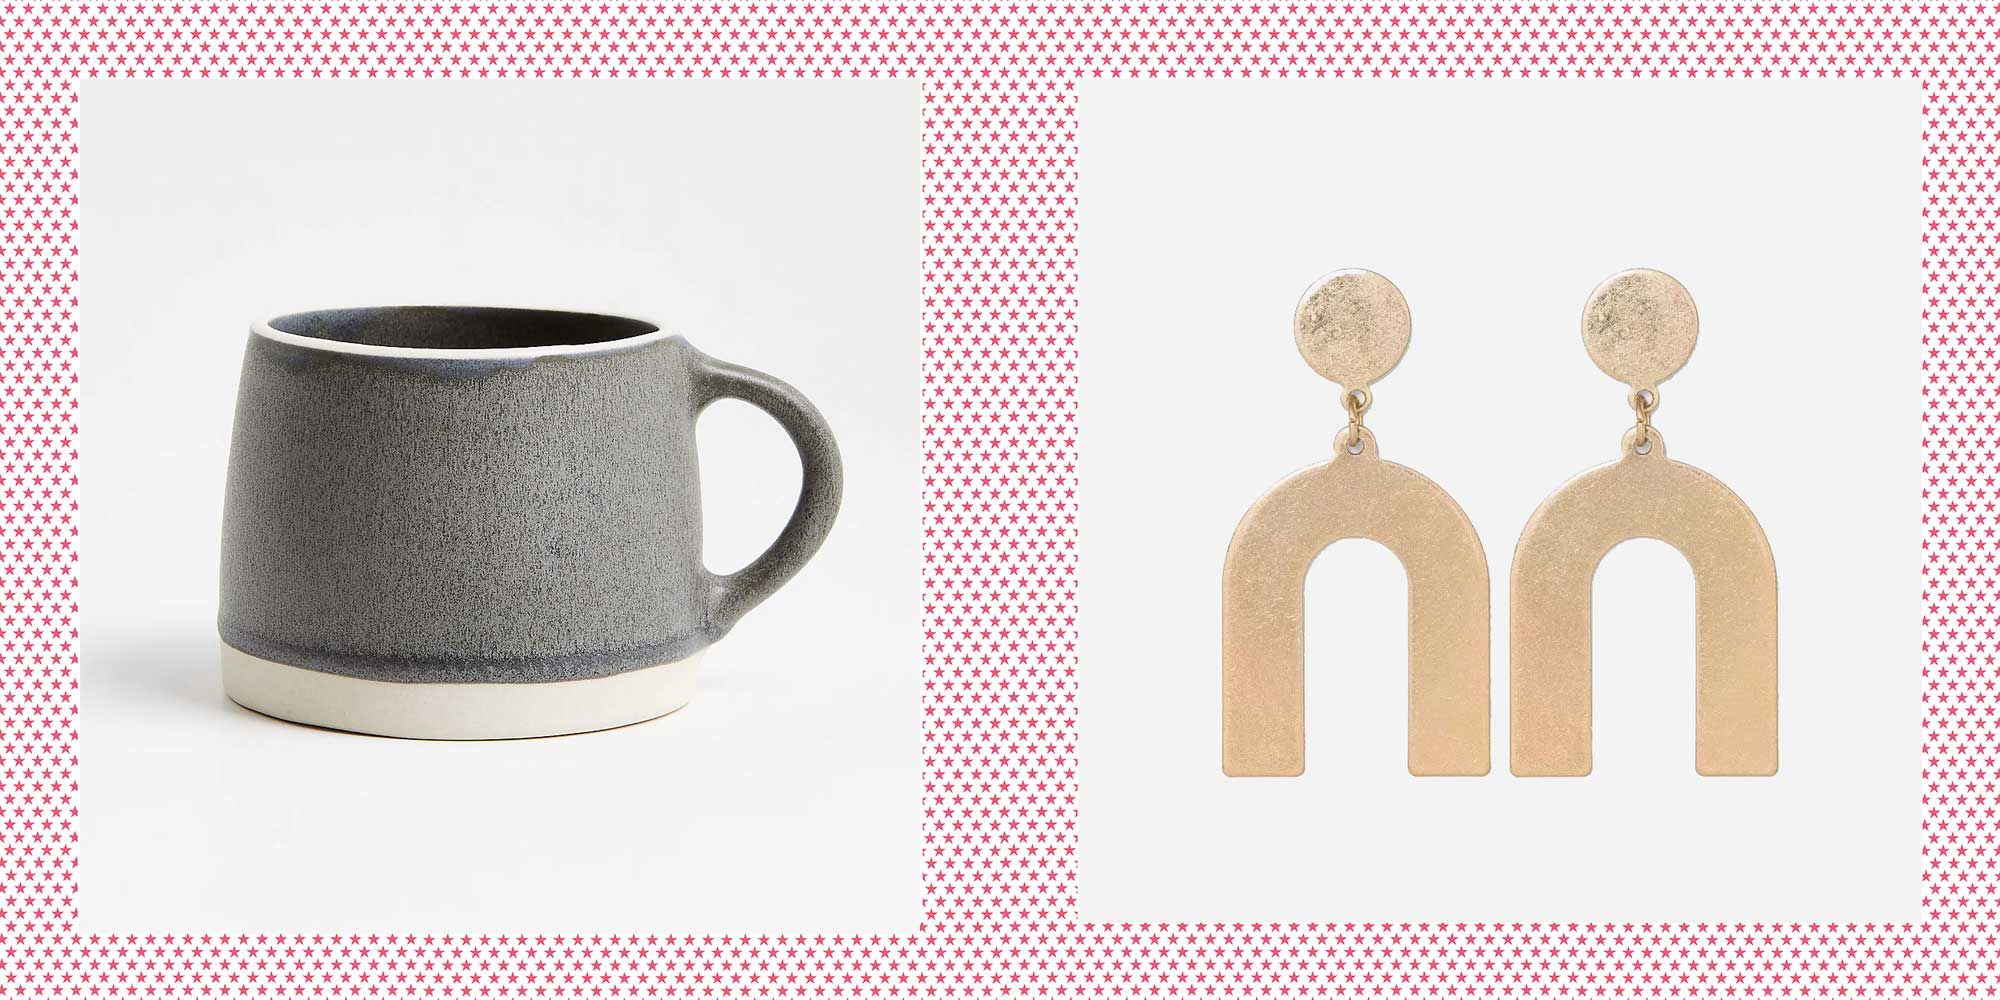 Best Small and Cheap Christmas Gifts Ideas for Coworkers